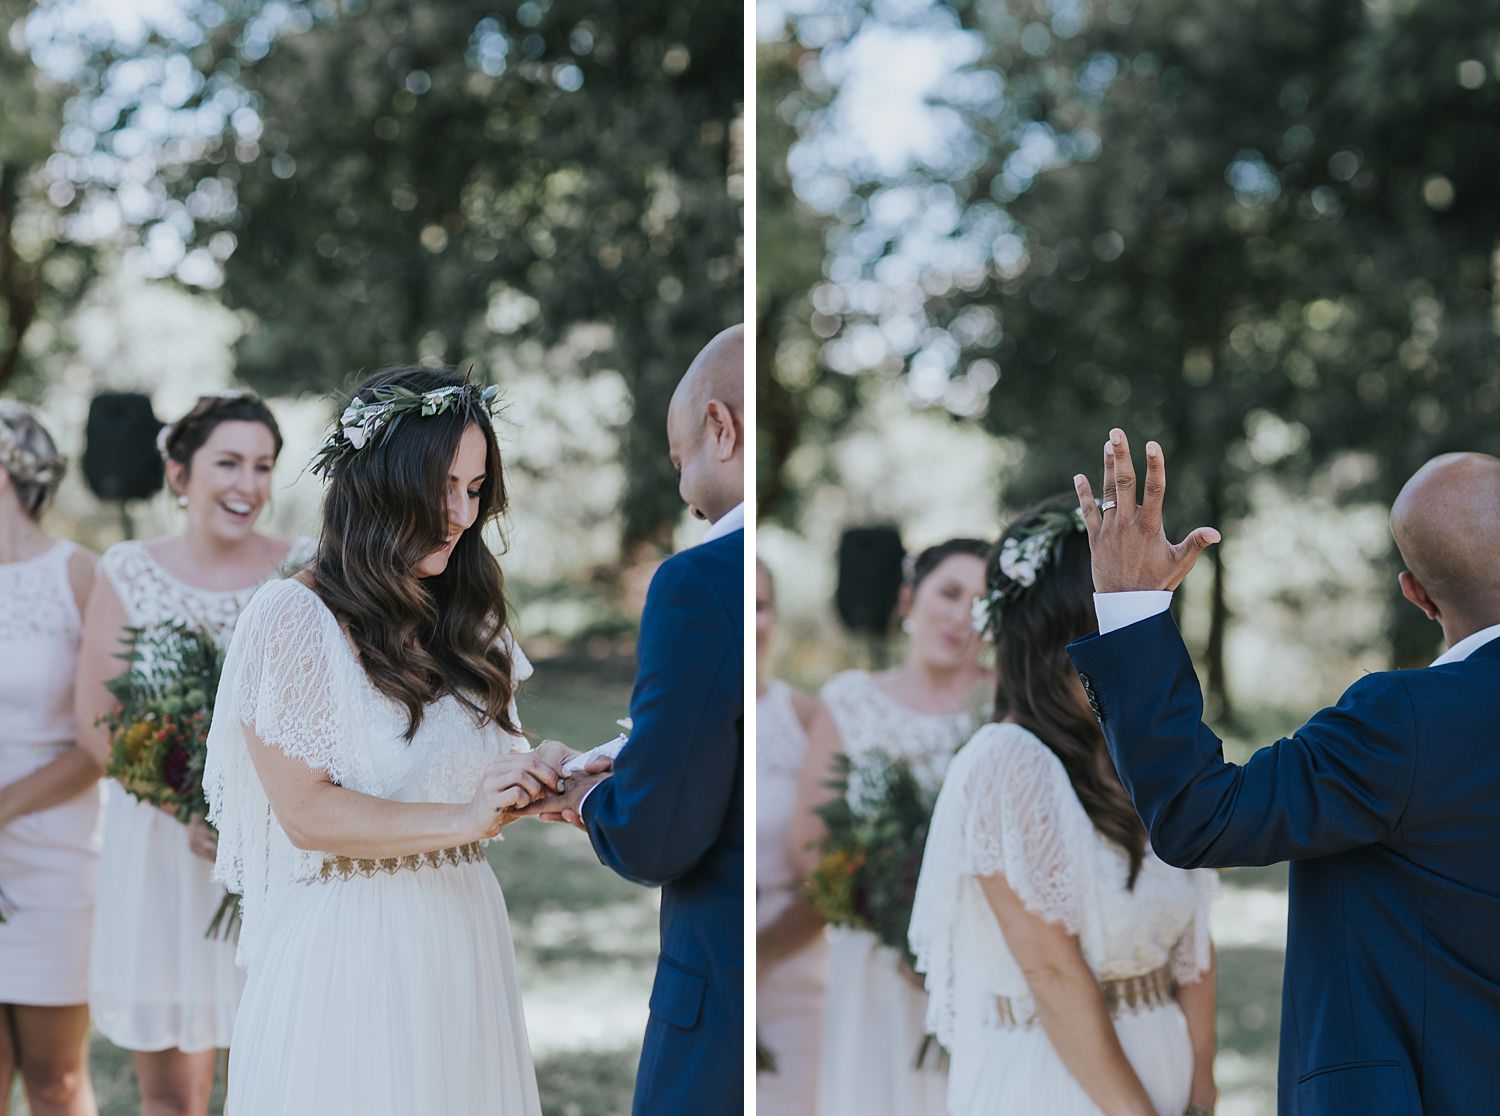 exchanging rings during the wedding ceremony